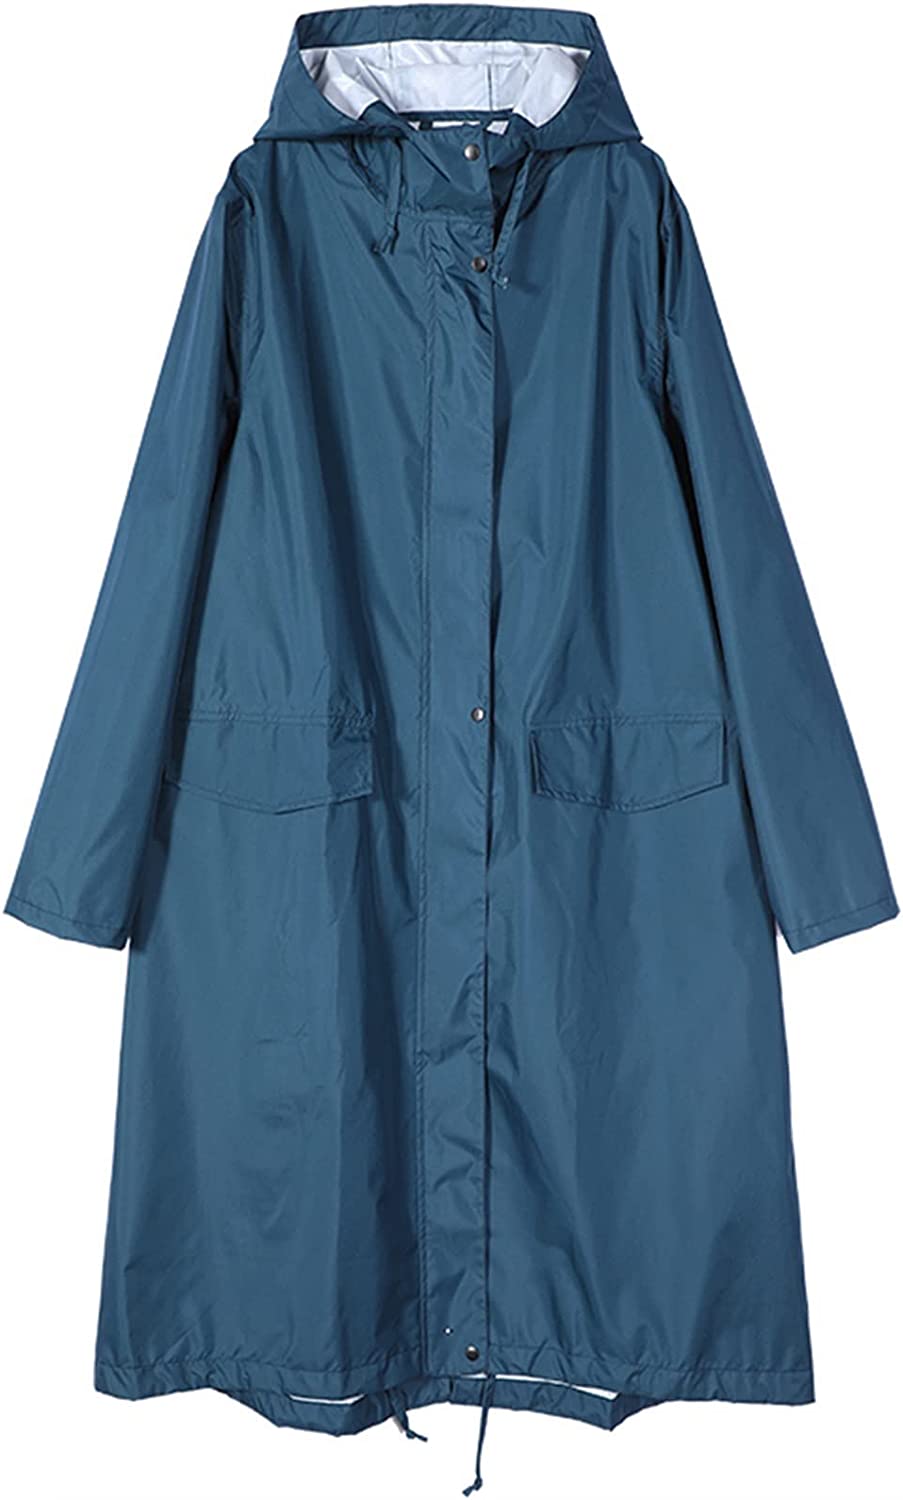 Long Raincoat Waterproof Rain Jacket with Hood Women Poncho Coat with for Hiking Cycling (Color : A-13, Size : X-Large)